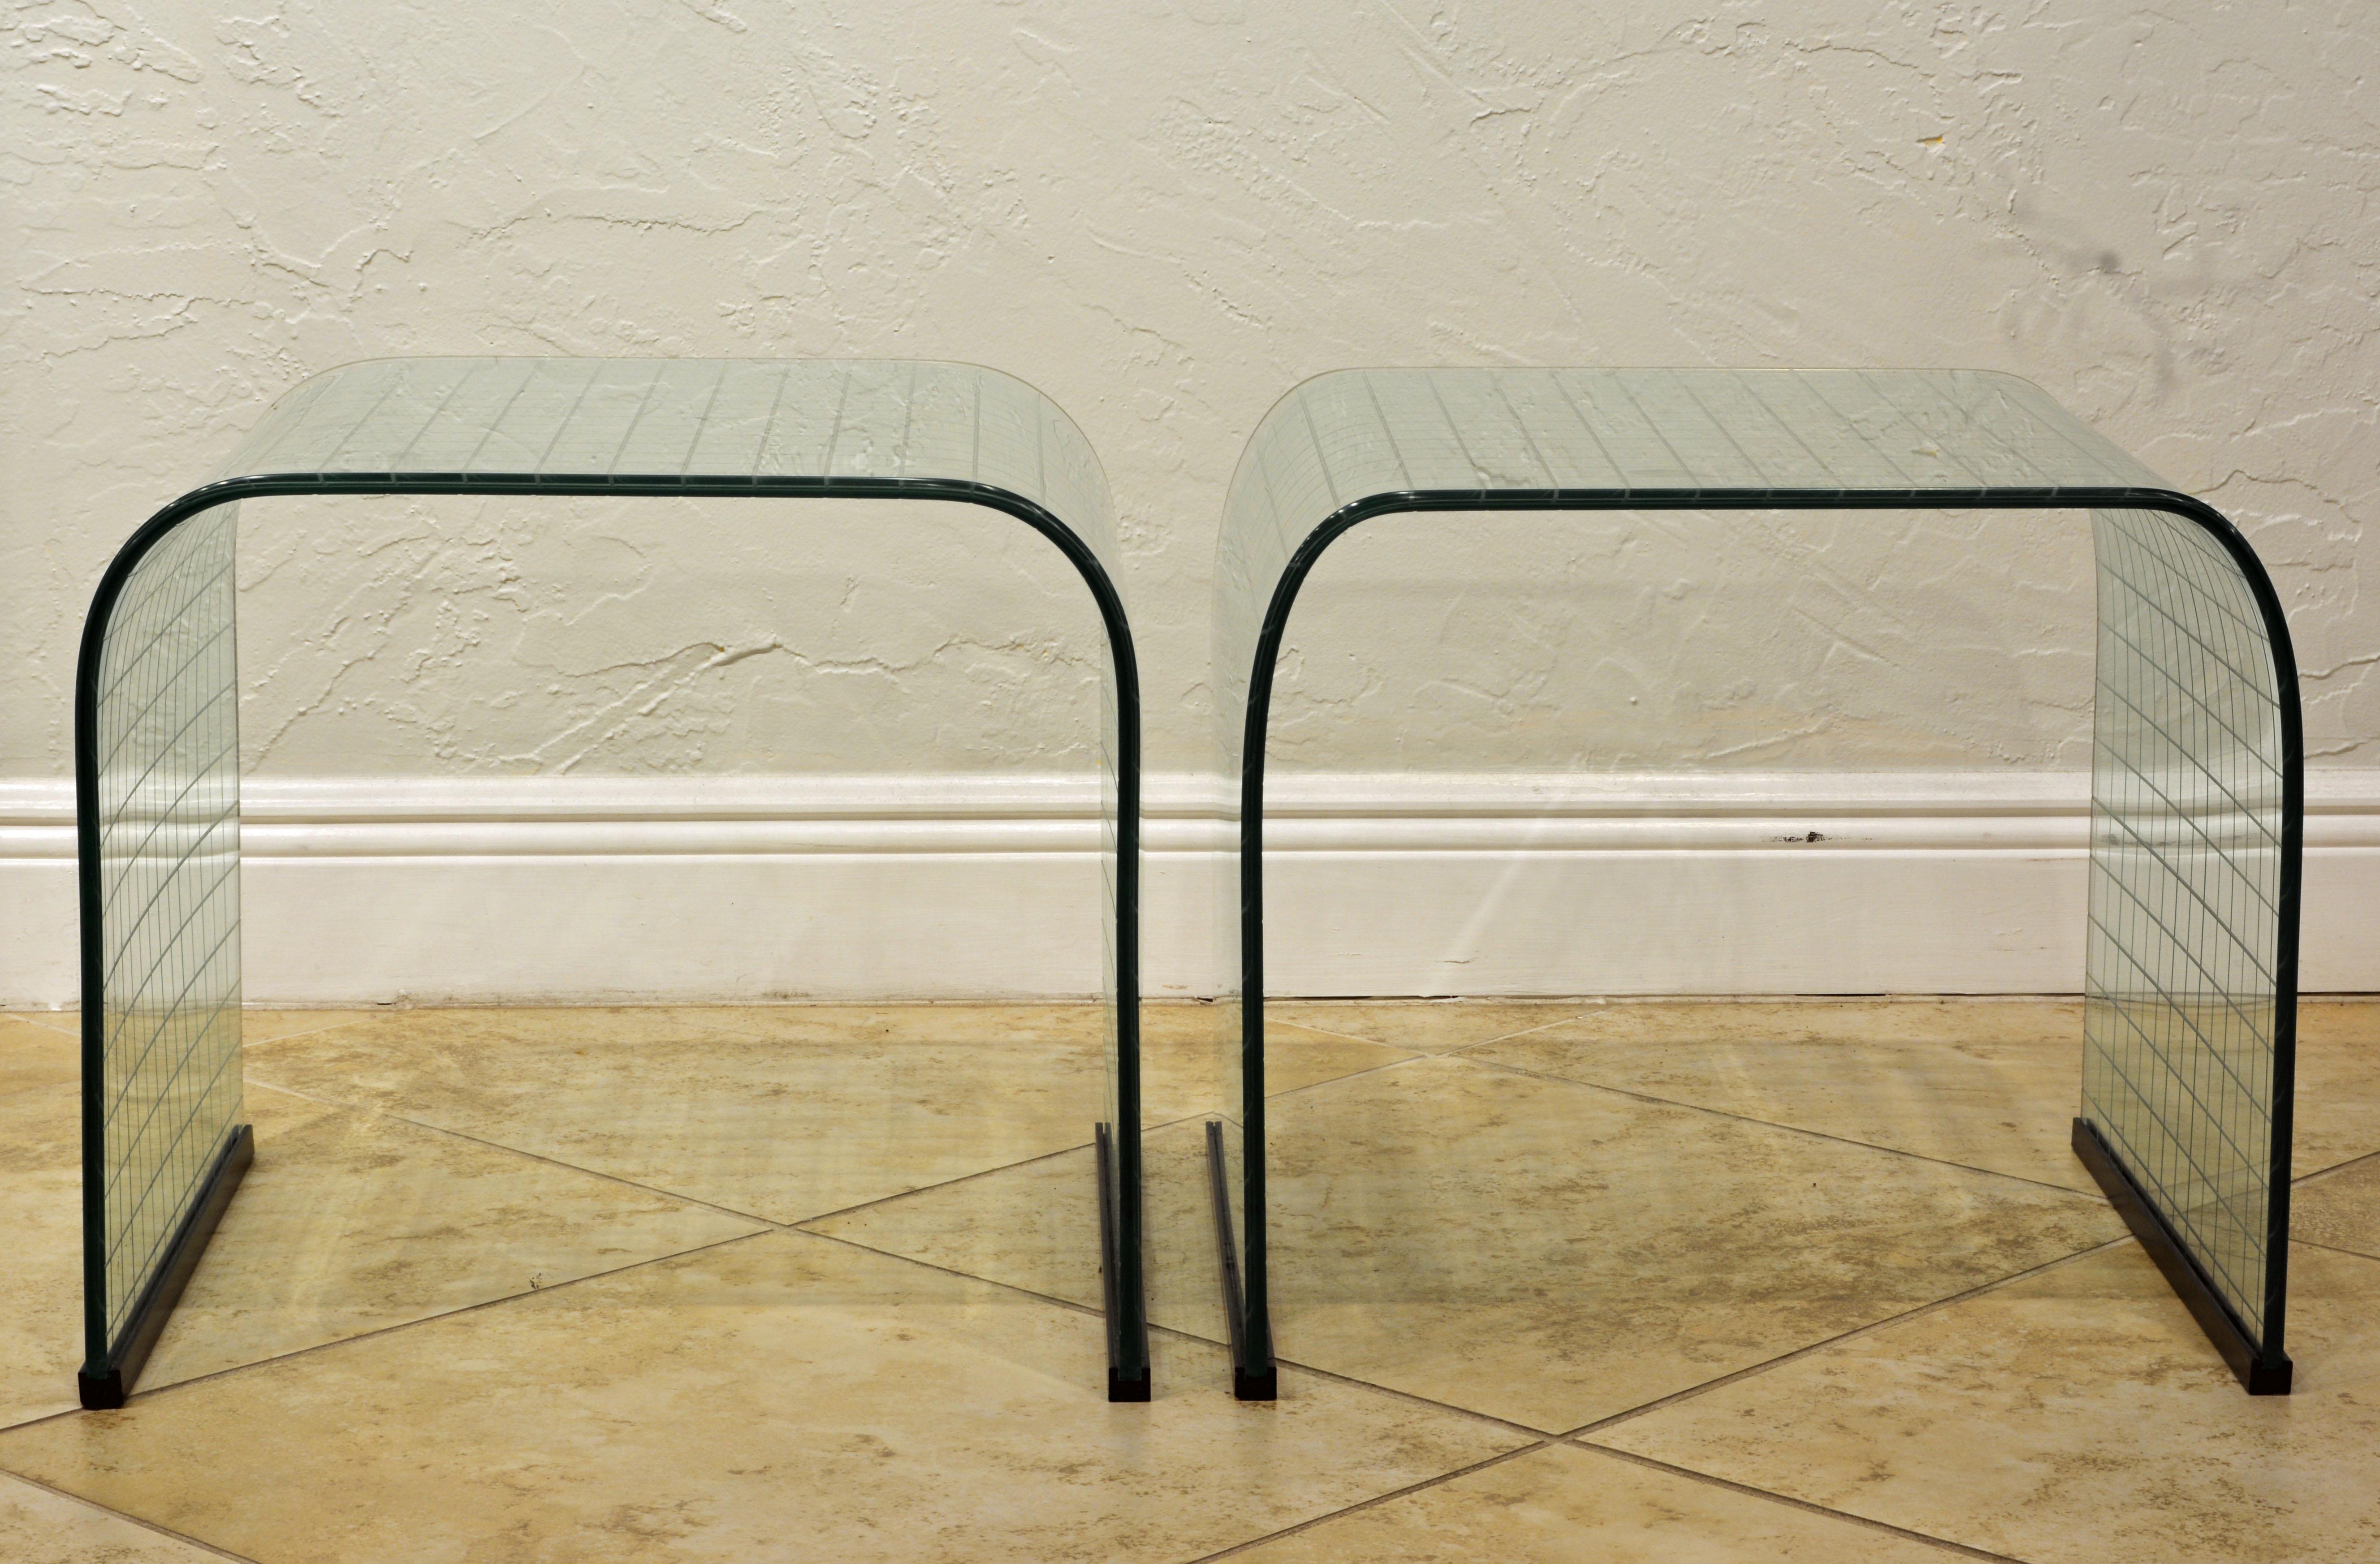 Pair of elegant glass side table designed by Italian designer and architect, Angelo Cortesi for Fiam of Italy in the 1970s. Sharp Mid-Century Modern design made from thick tempered and curved glass decorated with a square grid pattern and capped at